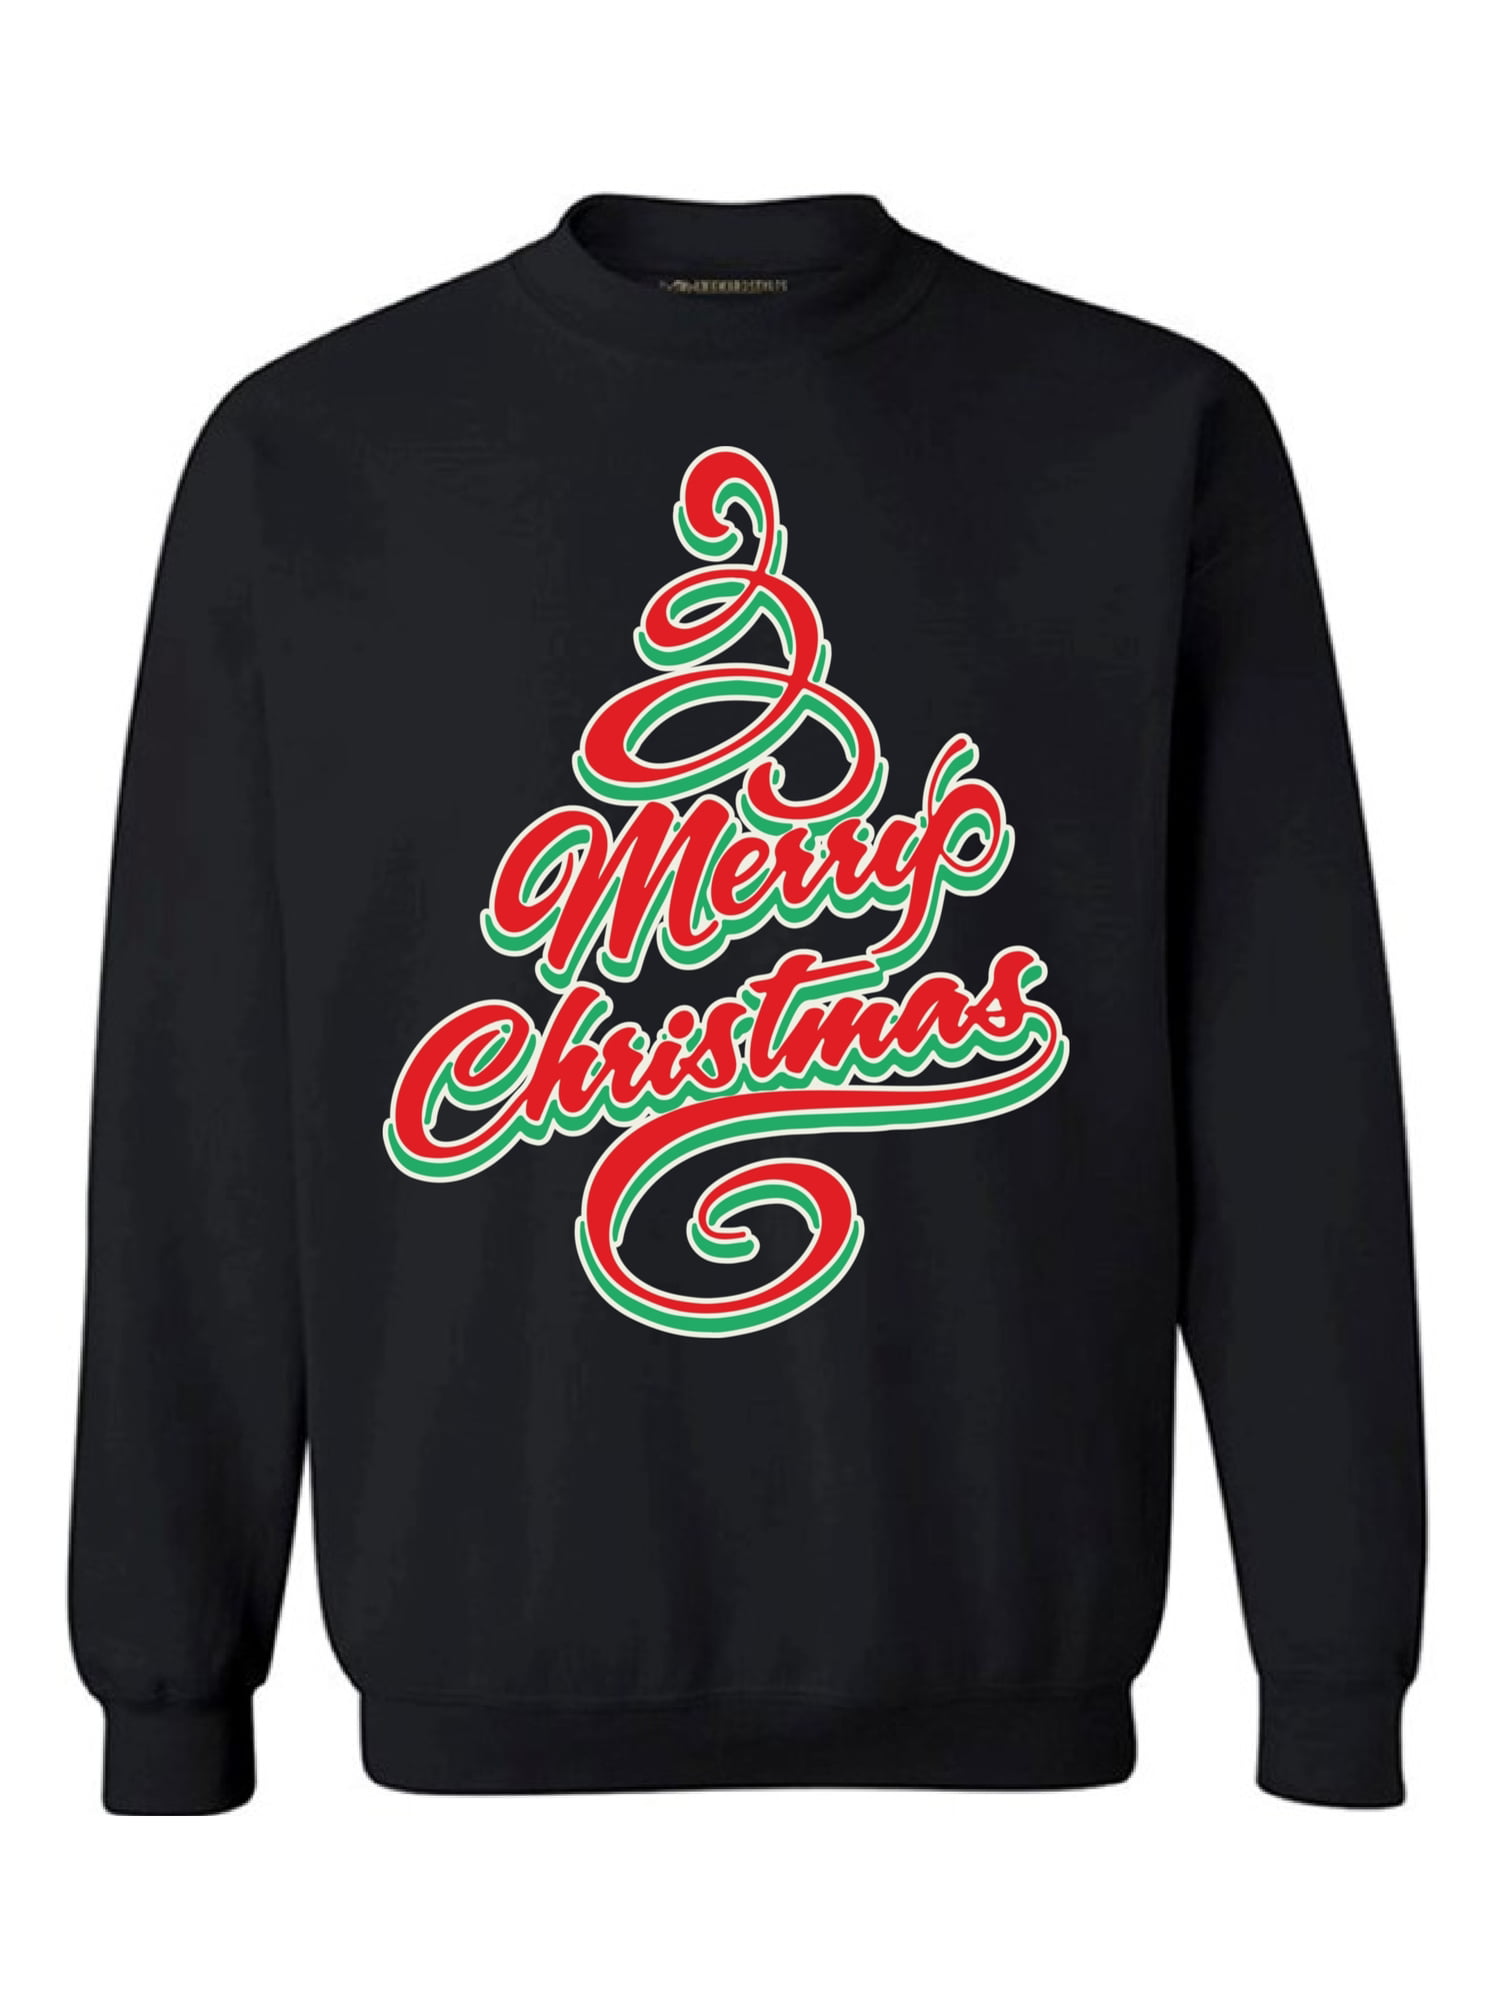 Unisex Holiday Sweaters Ugly Christmas Sweaters for Men and Women